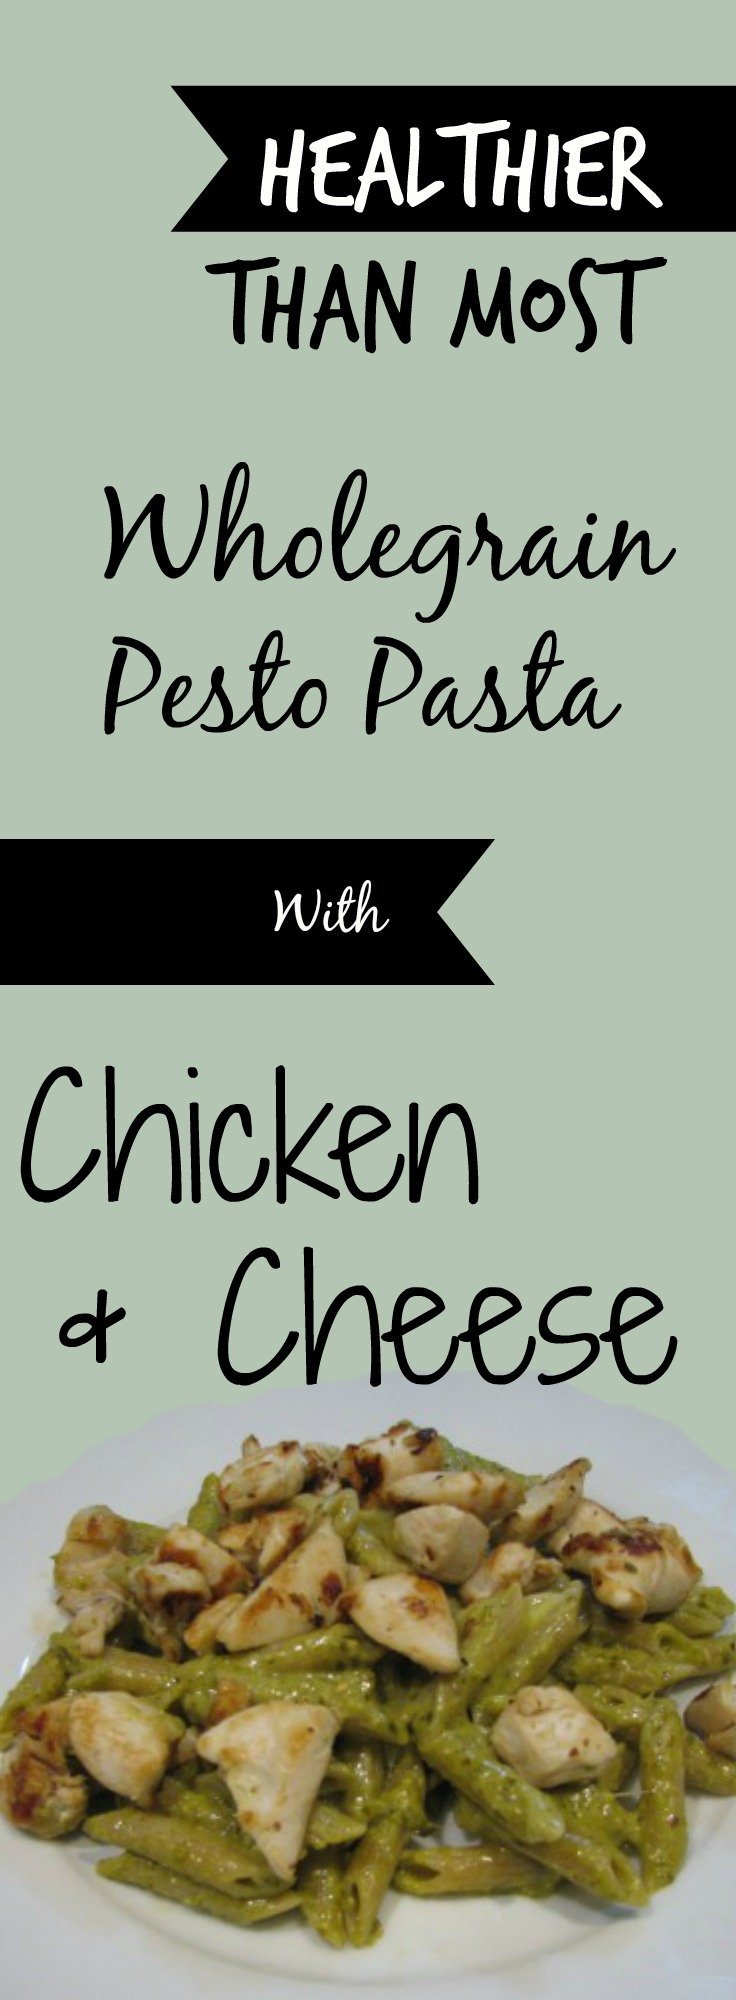 Pesto pasta with chicken and cheese